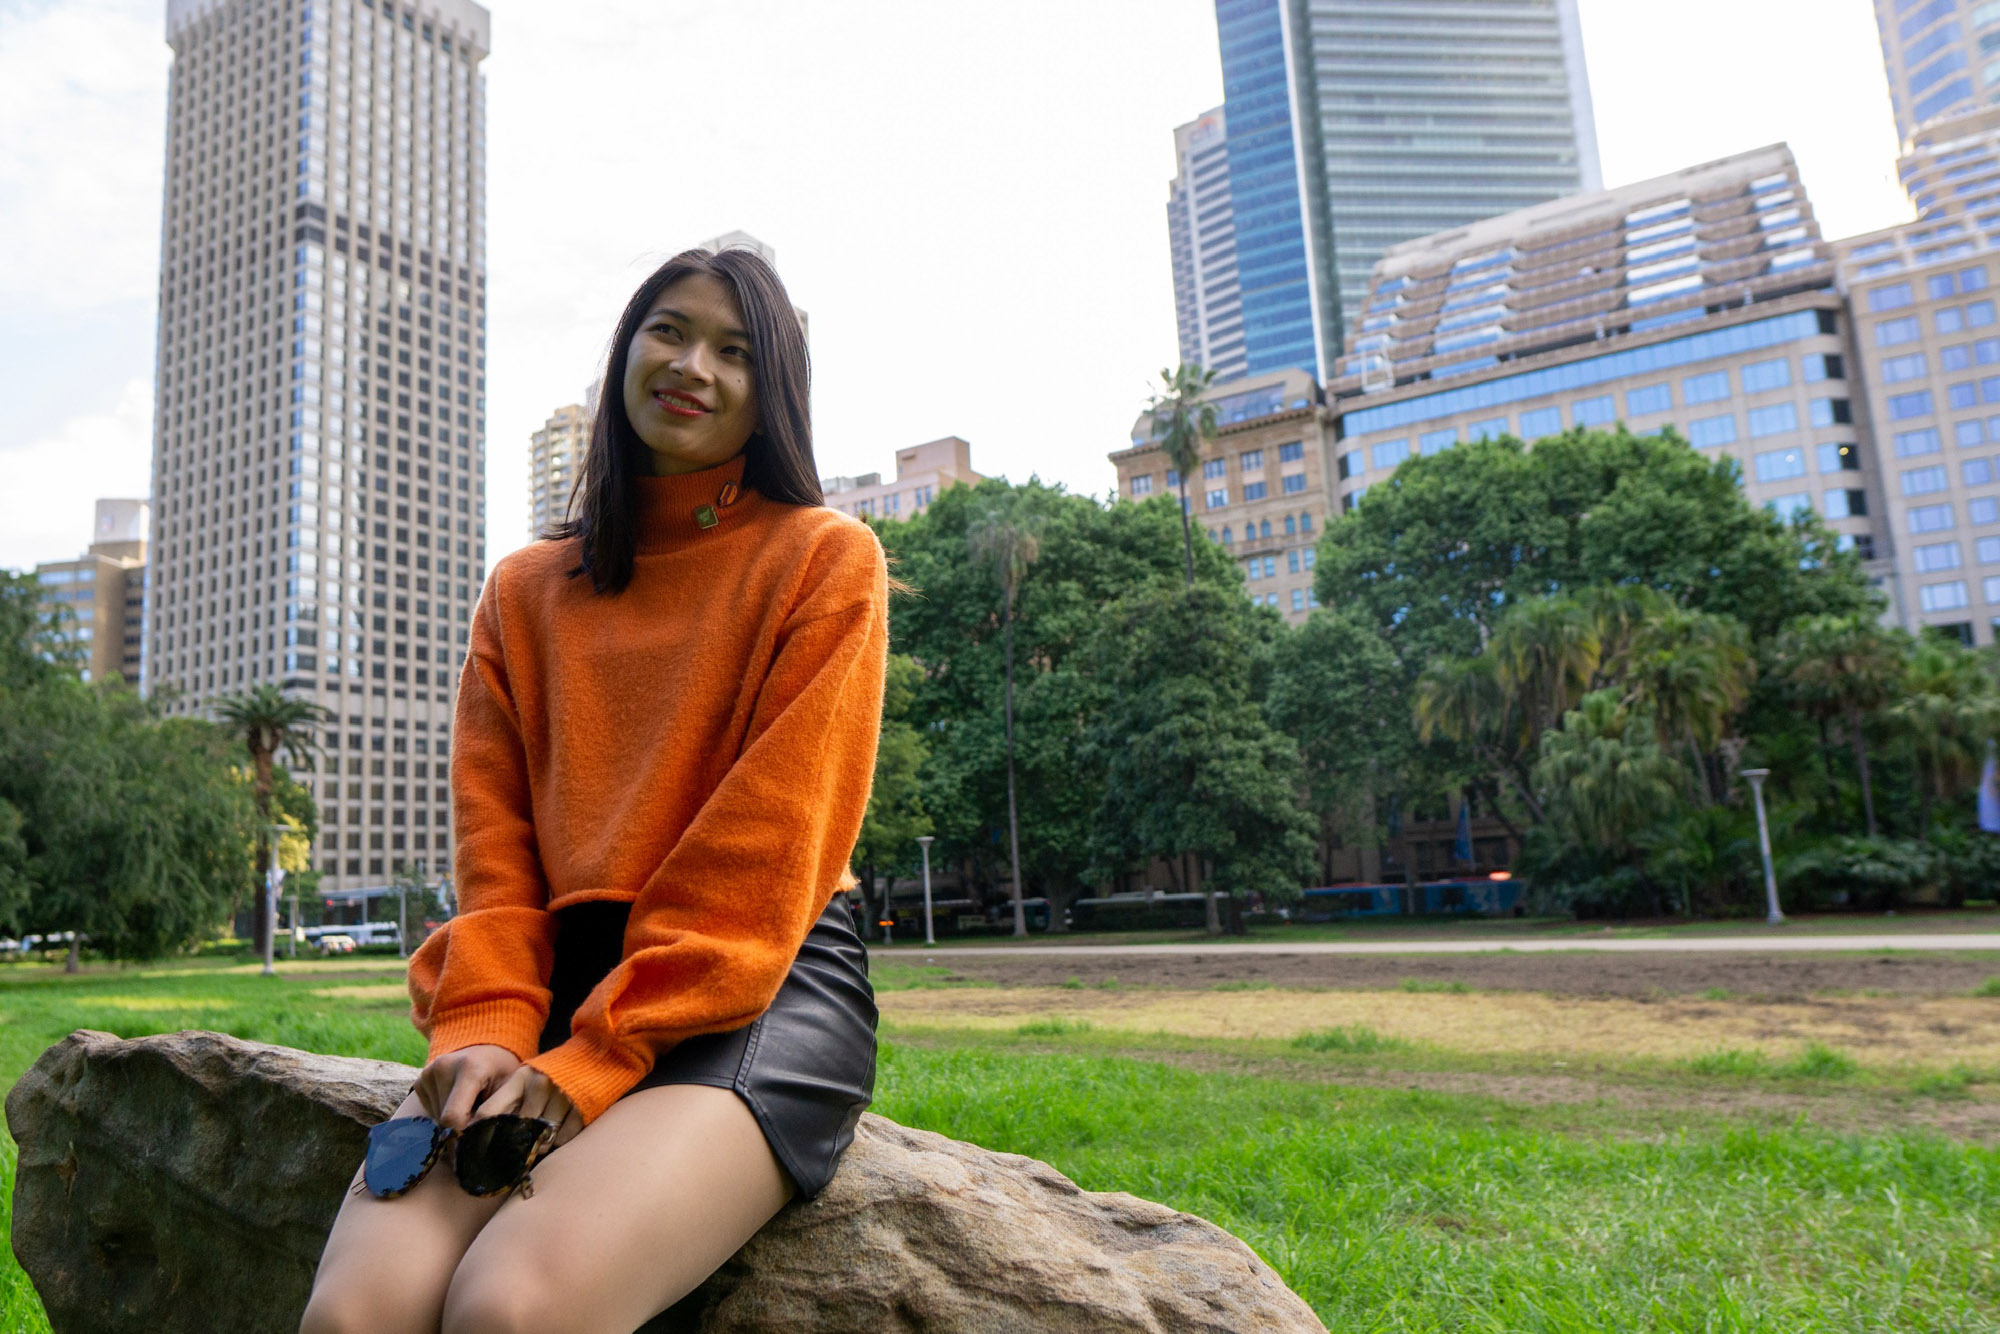 A woman with short dark hair, sitting on a large rock. She is wearing a bright orange sweater and a black skirt. She is in a park and there are skyscrapers behind her.